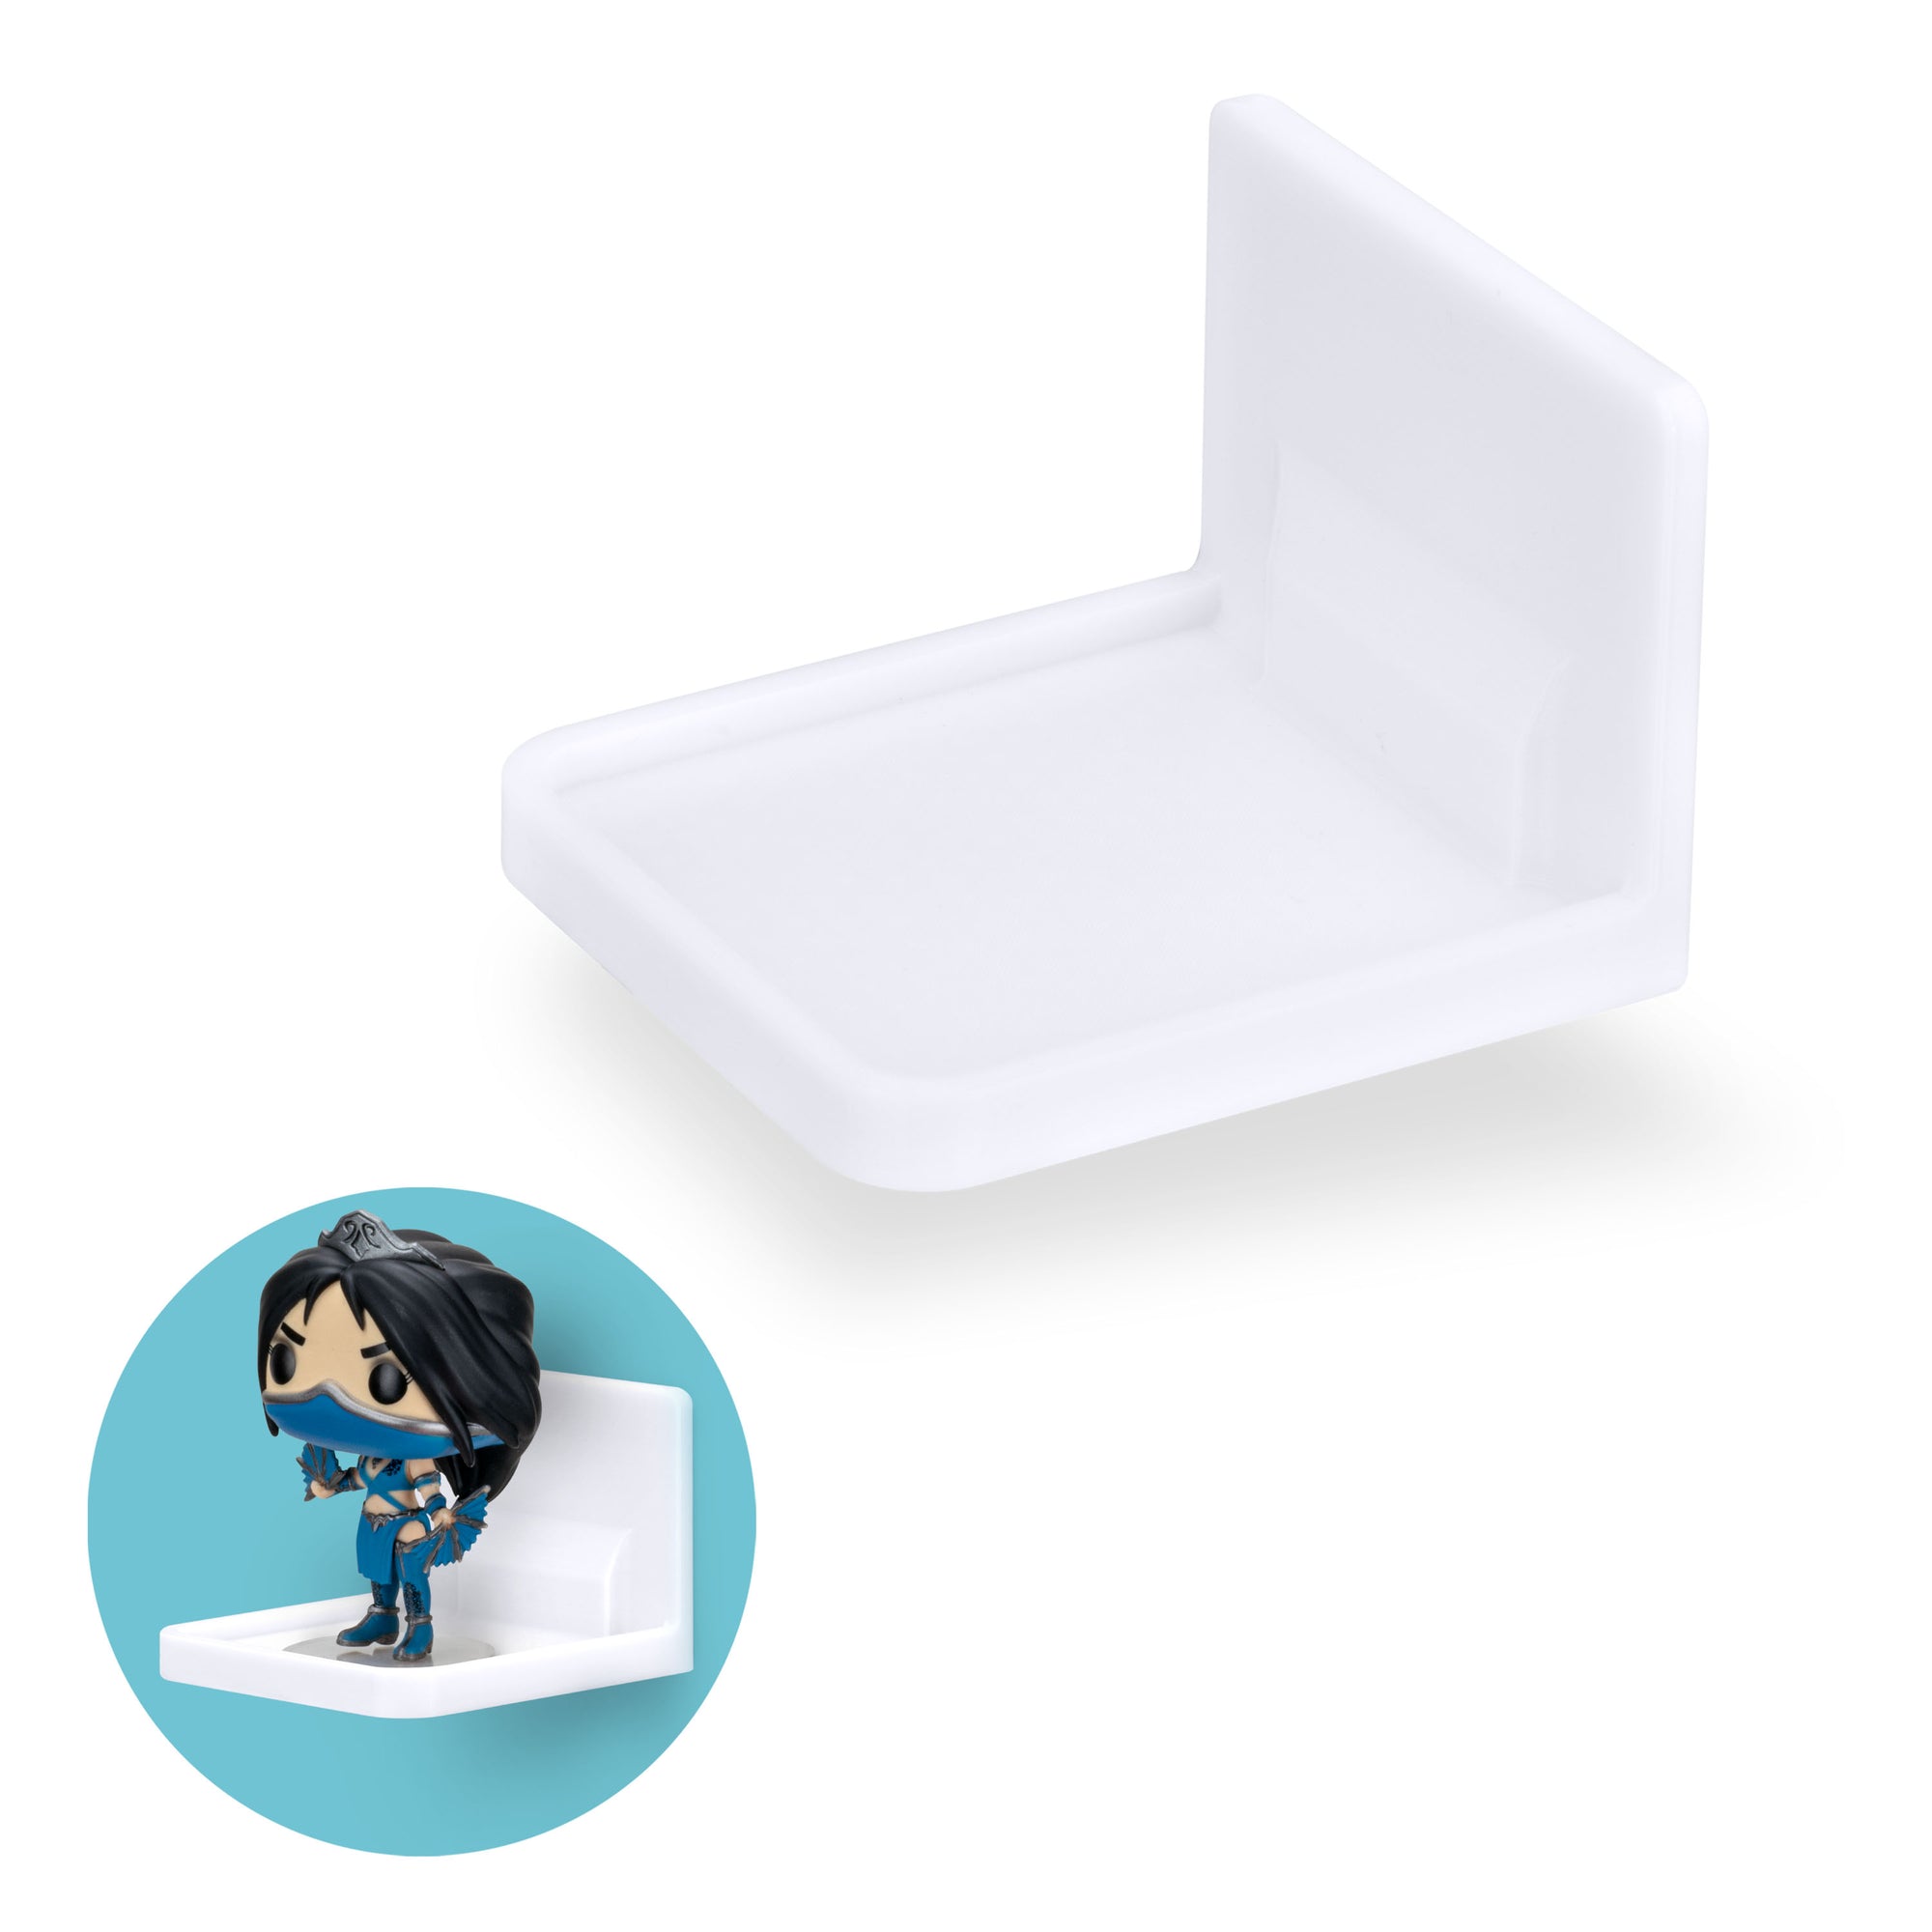 Adhesive Small Square Floating Shelf for Security Cameras, Baby Monitors, Speakers, Plants & More